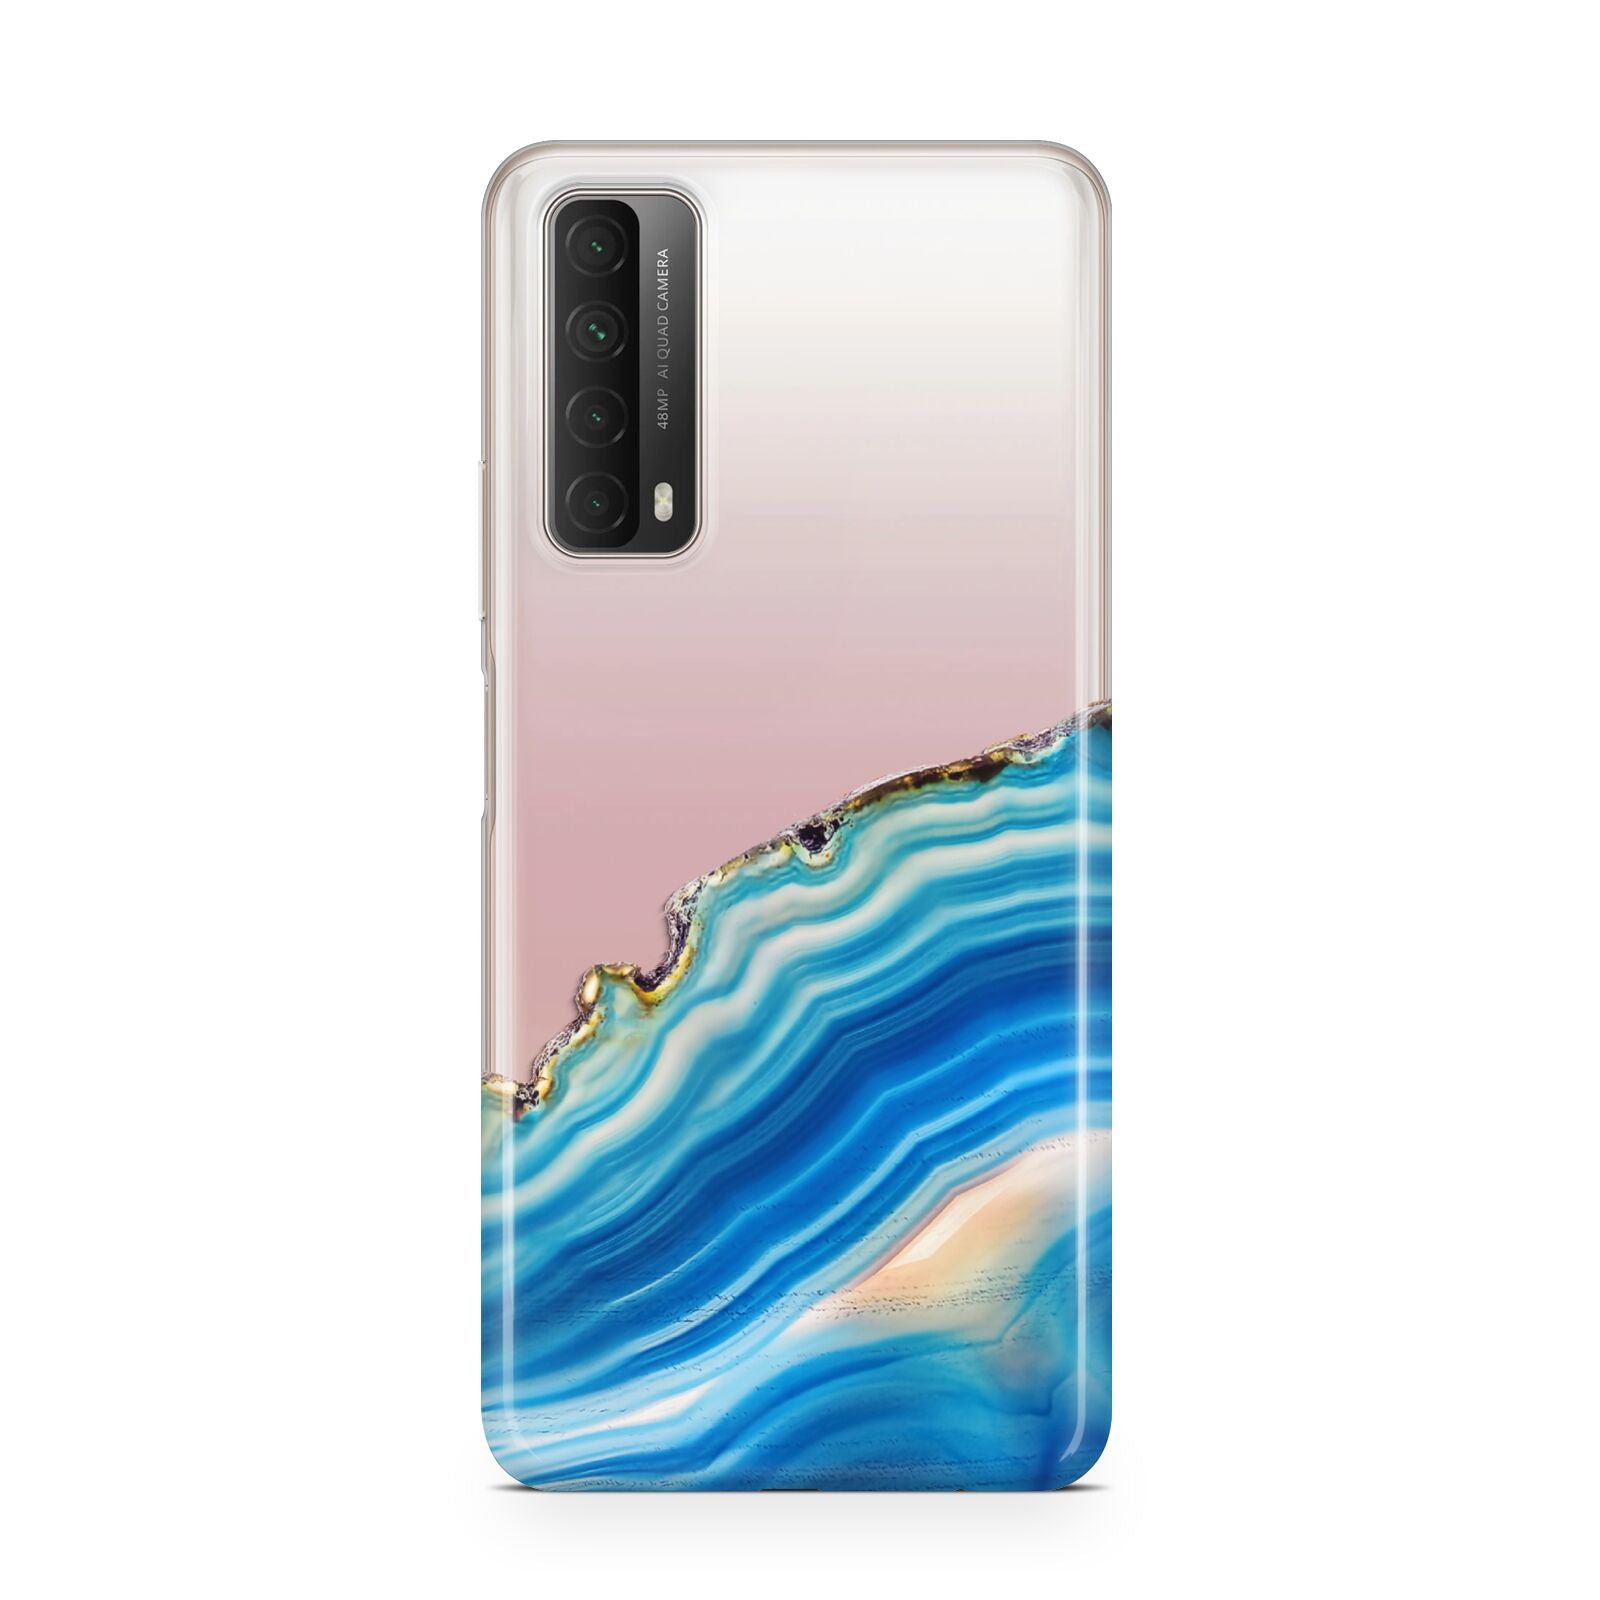 Agate Pale Blue and Bright Blue Huawei P Smart 2021